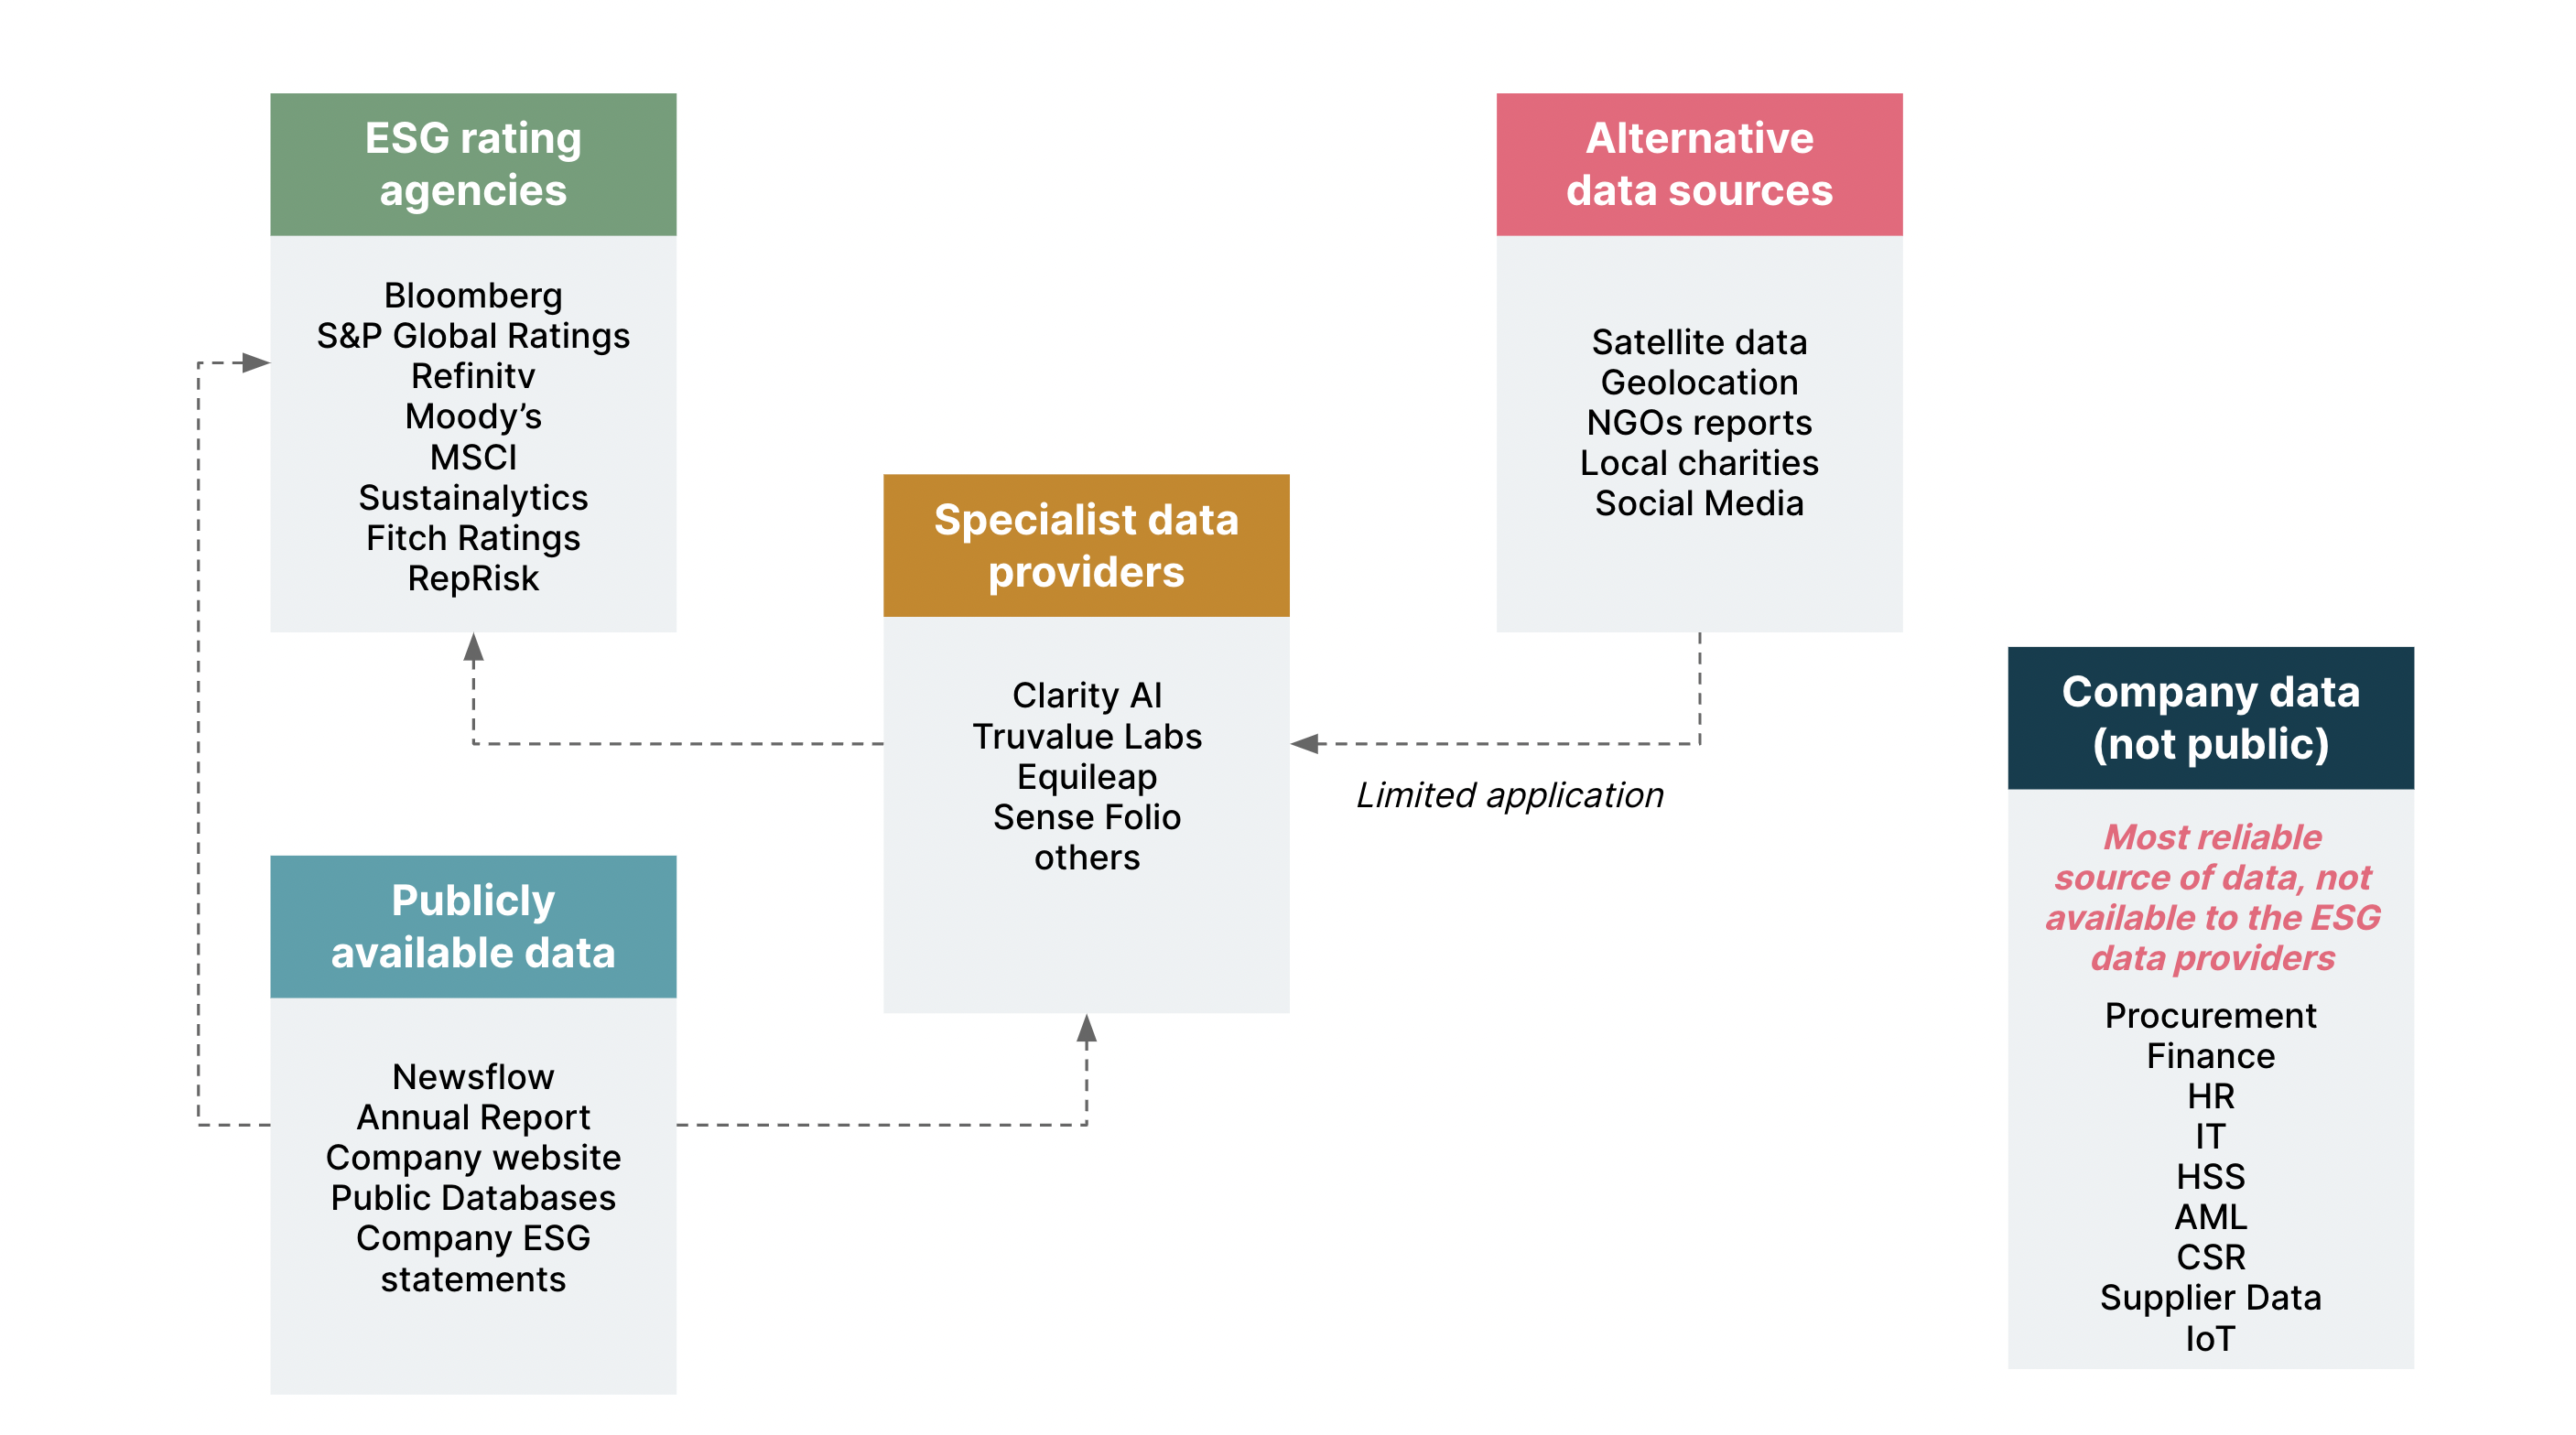 Diagram showing various data sources for ESG information, highlighting issues with each source